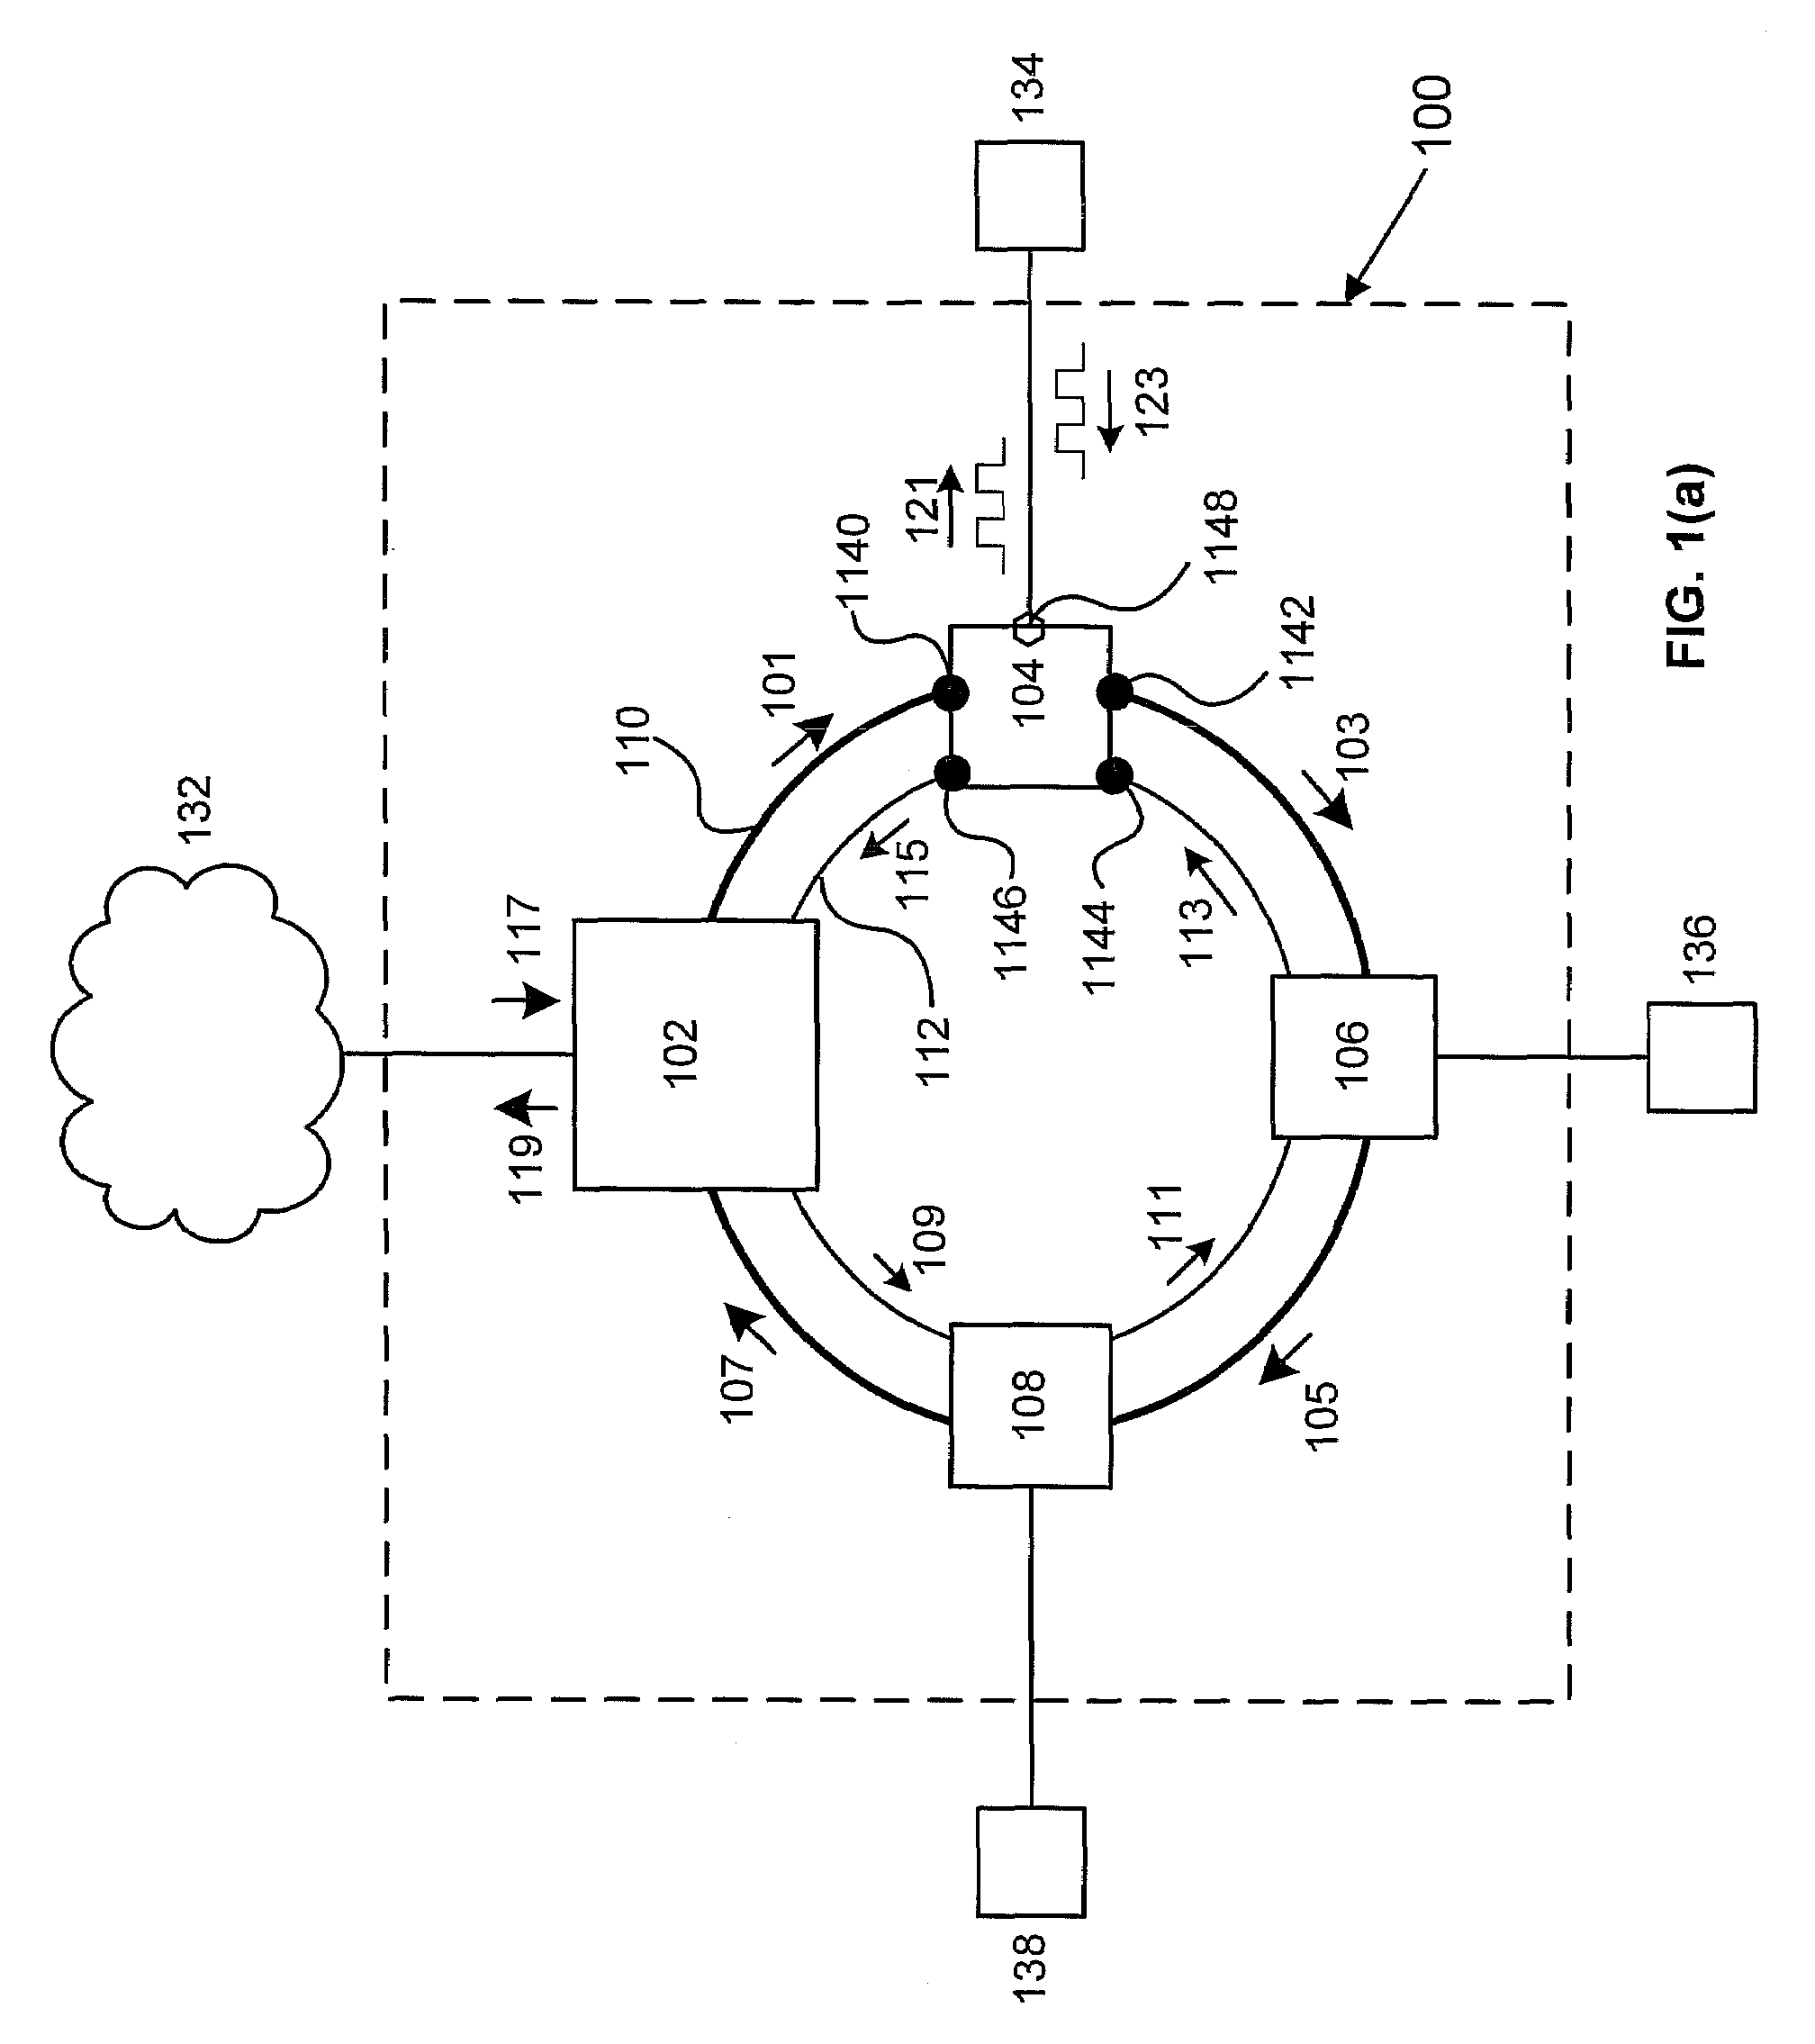 Orthogonal Frequency Division Multiple Access Based Optical Ring Network